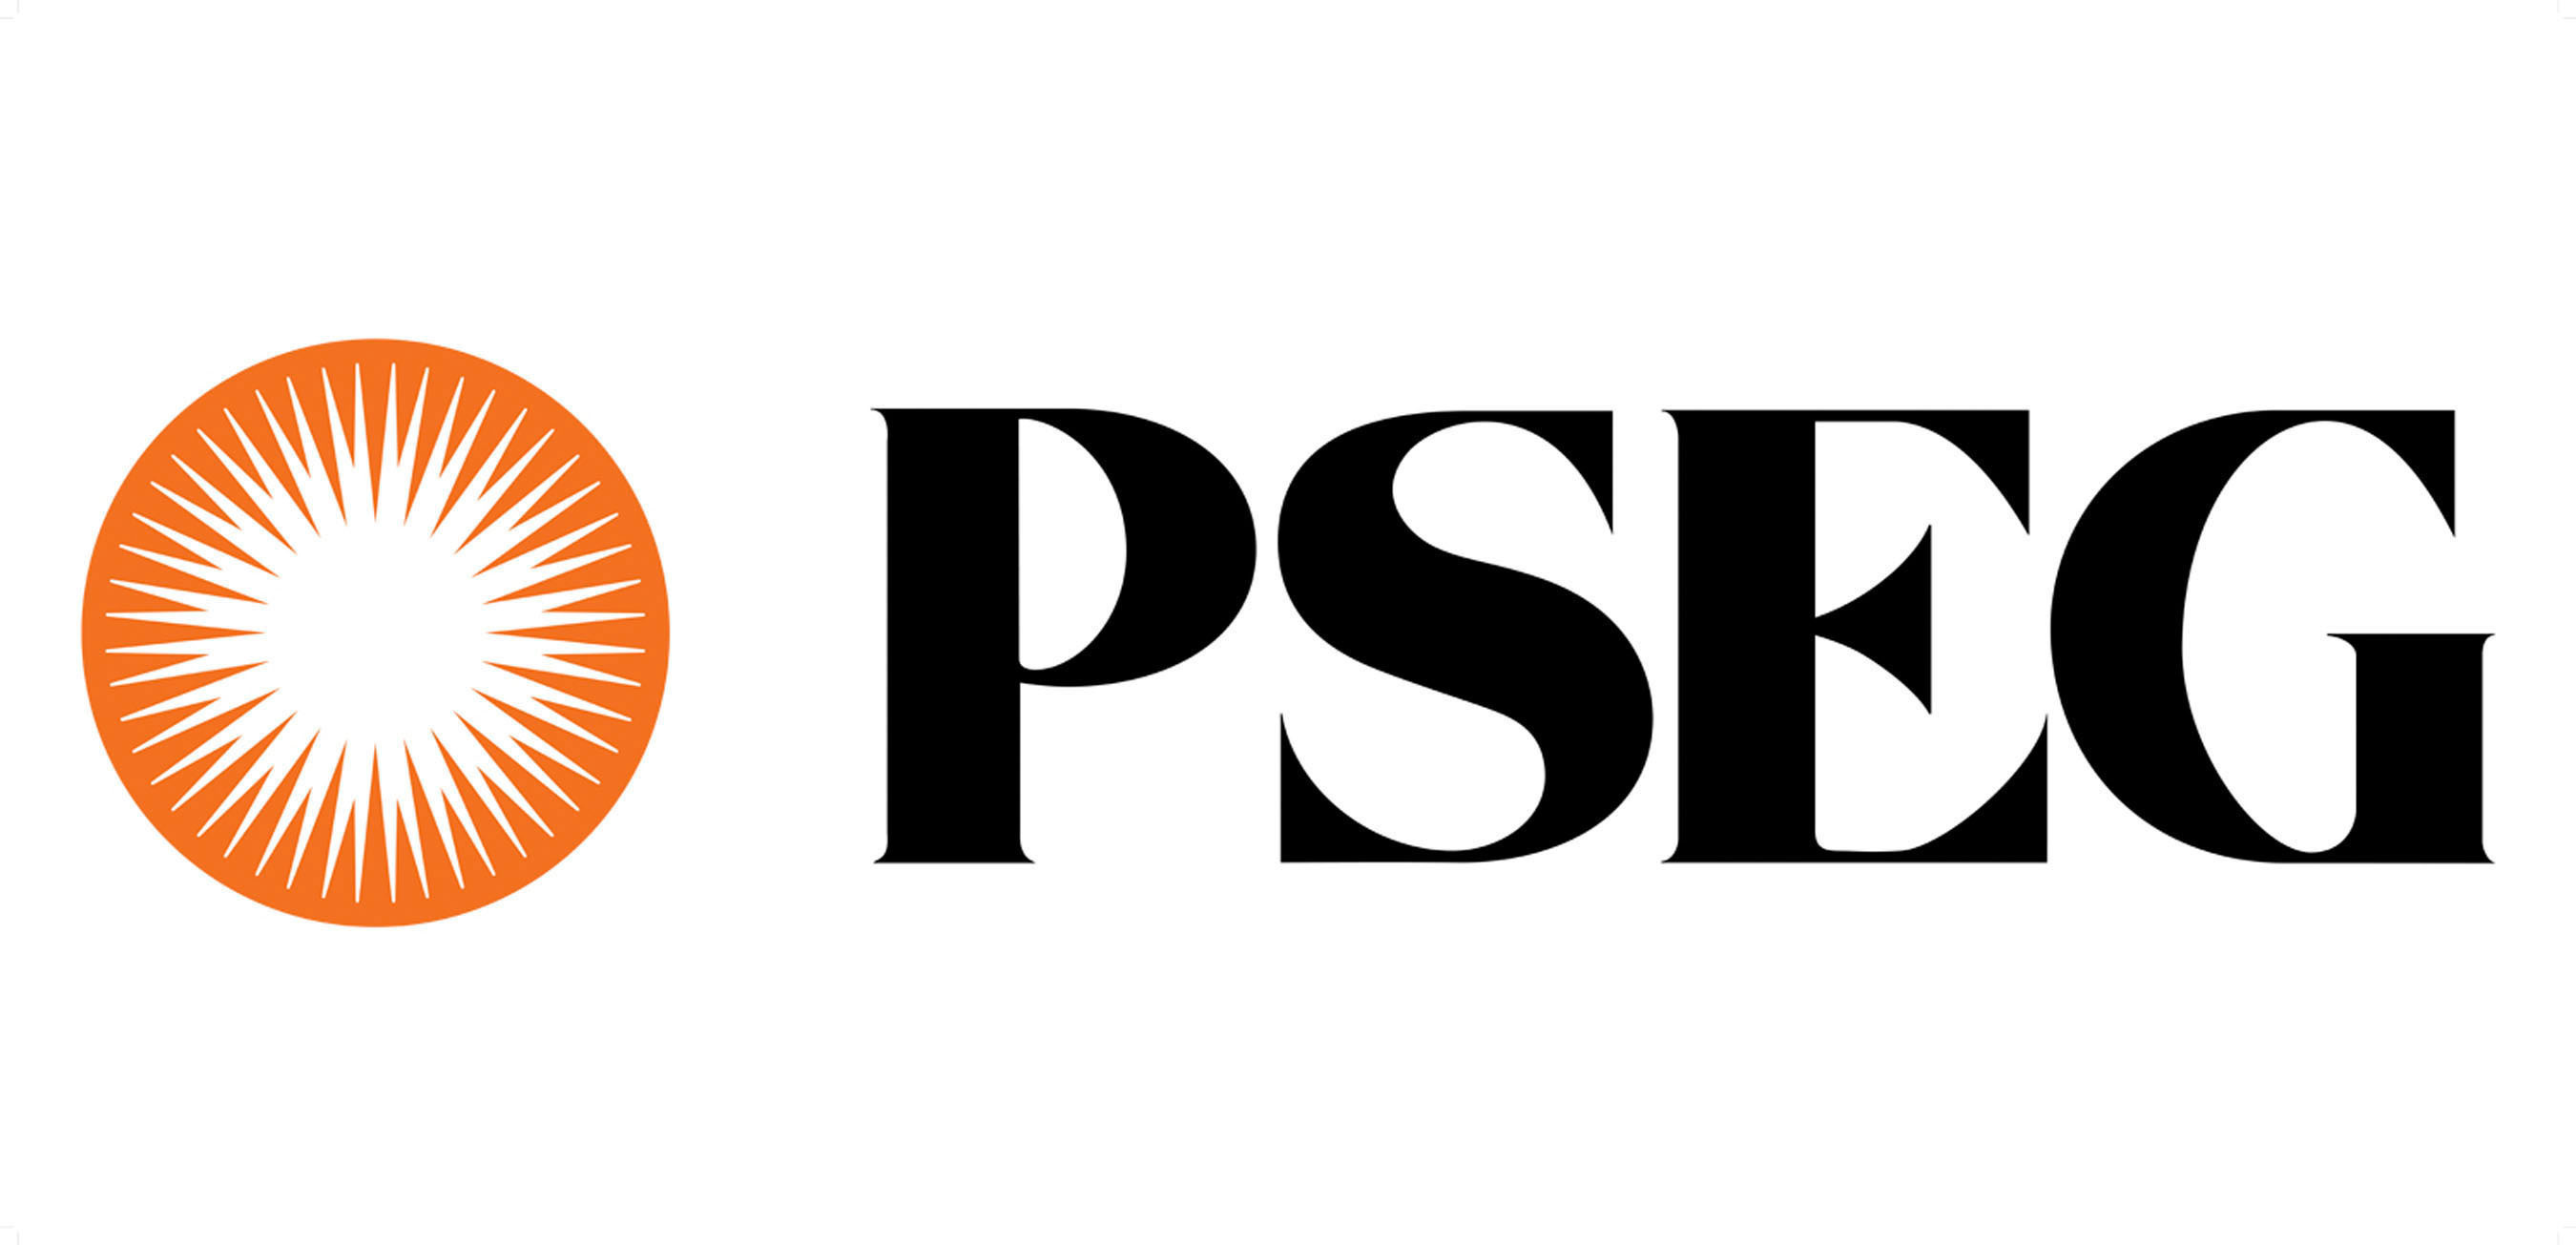 Public Service Enterprise Group (PSEG) is a publicly traded diversified energy company. Its operating subsidiaries are: PSEG Power, Public Service Electric and Gas Company (PSE&G) and PSEG Long Island.